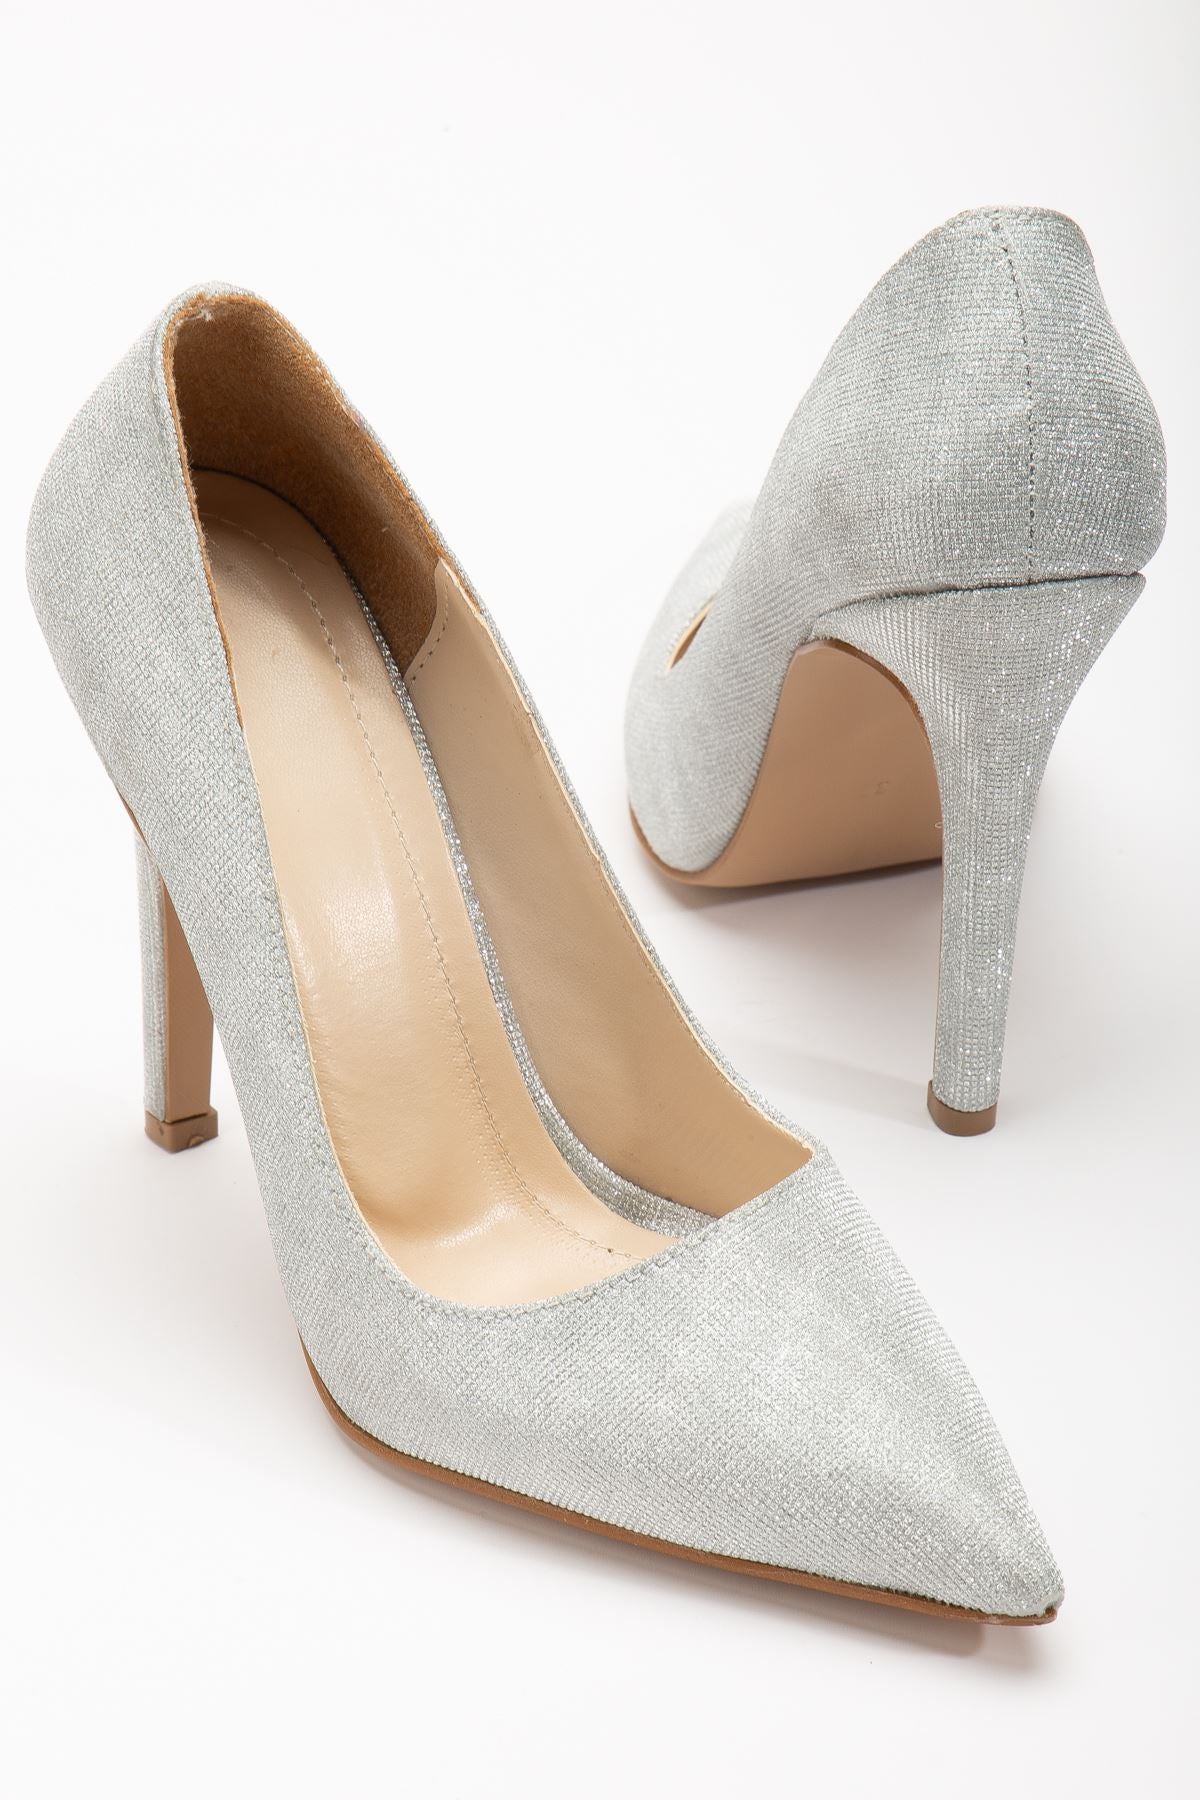 Onella Silver Glitter Pointed Low-cut Women's Heeled Shoes - STREETMODE™